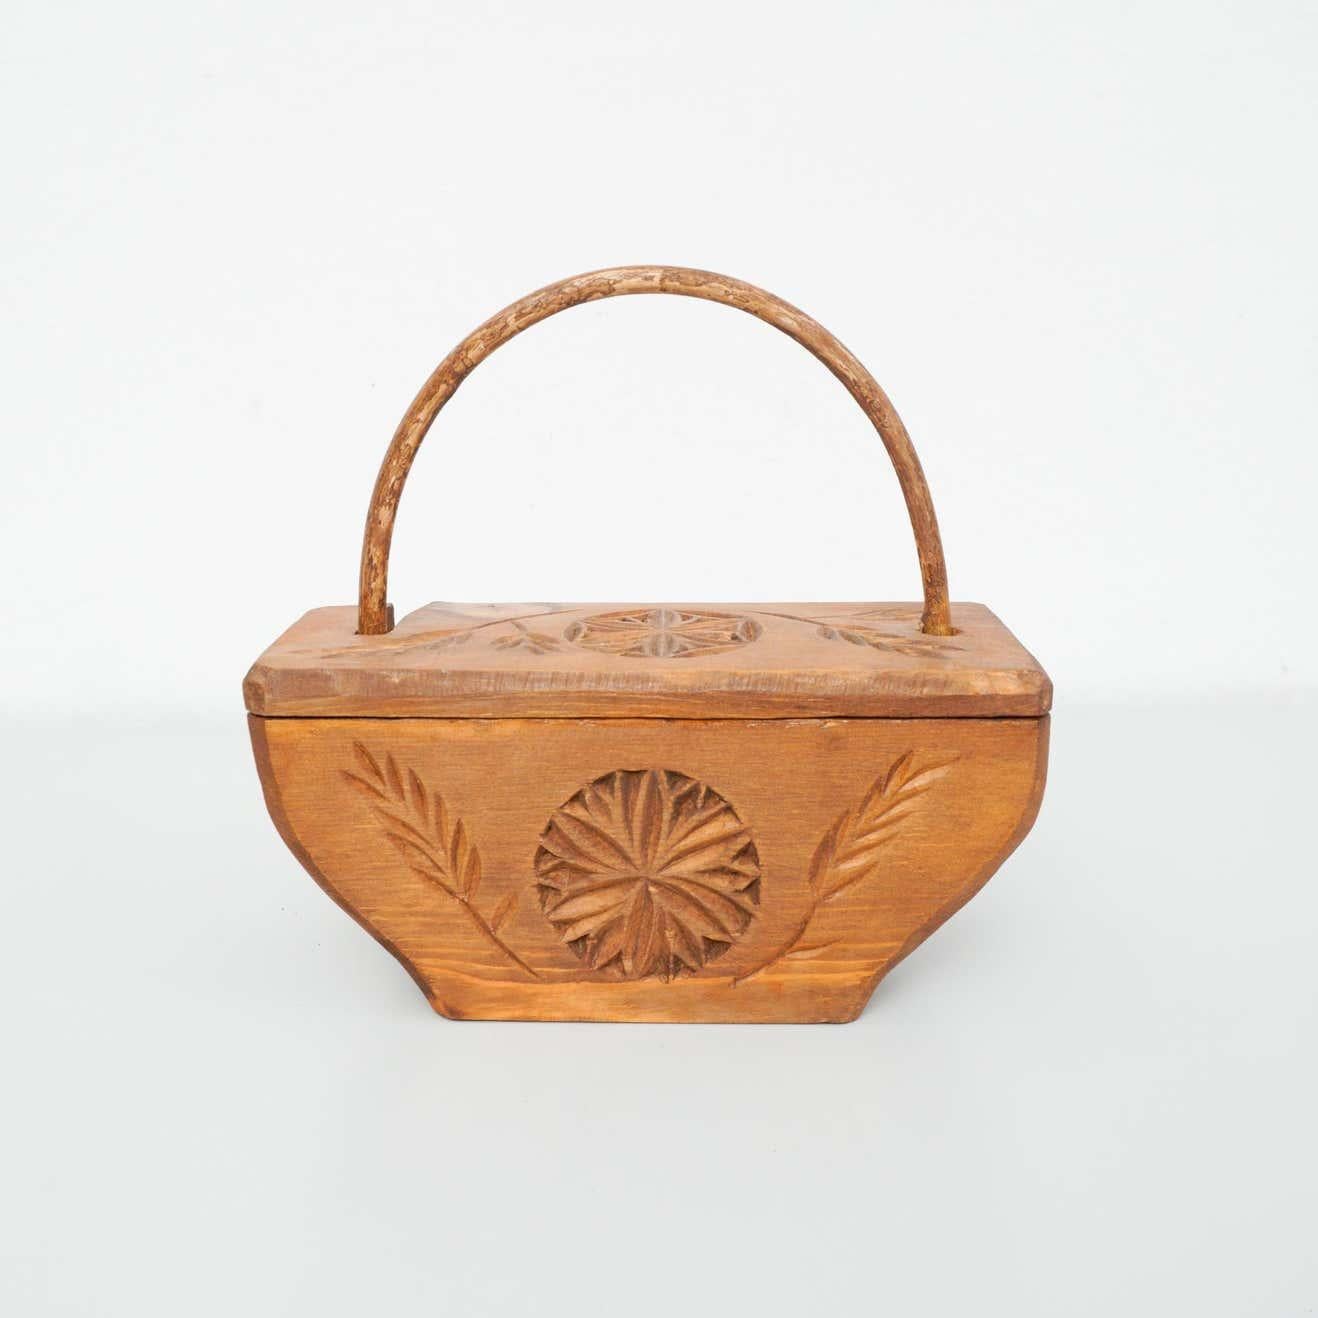 Rustic Primitive wood hand carved basket, circa 1950

Manufactured in France.

In original condition with minor wear consistent of age and use.